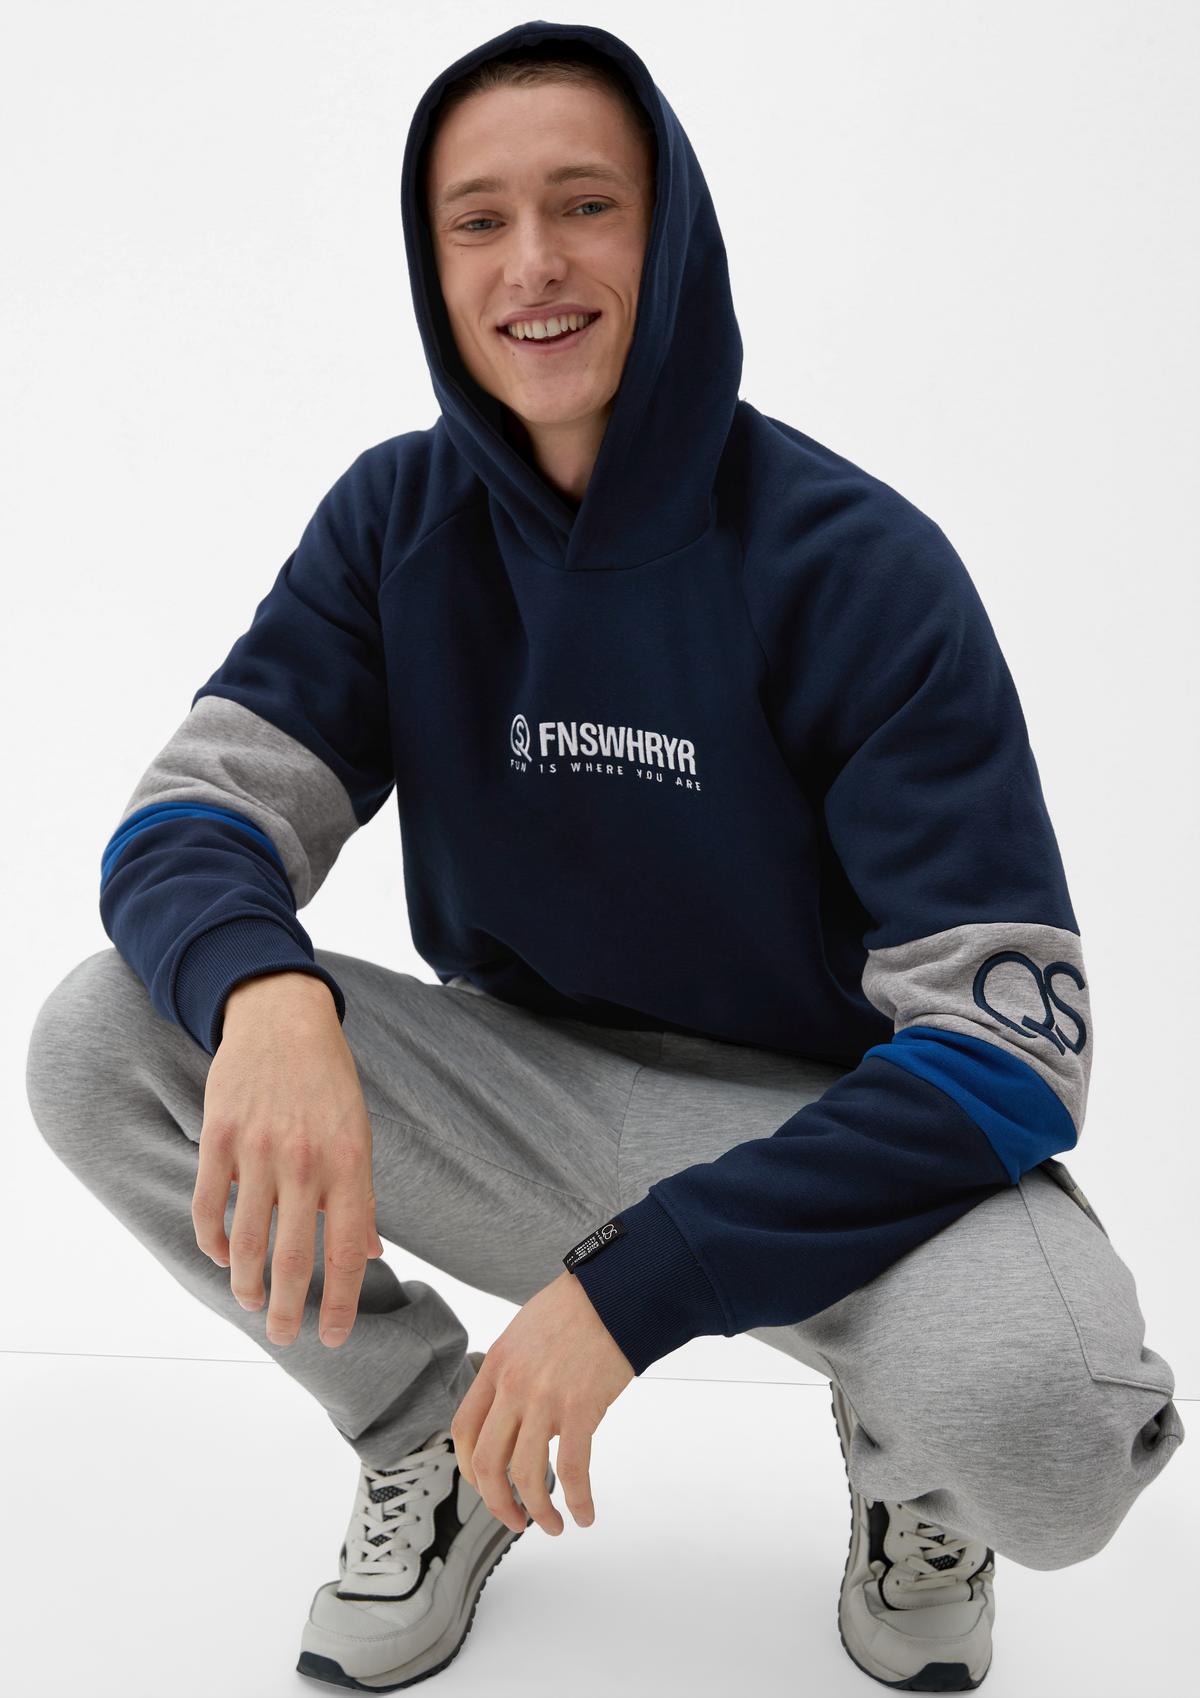 s.Oliver Sweatshirt with logo embroidery